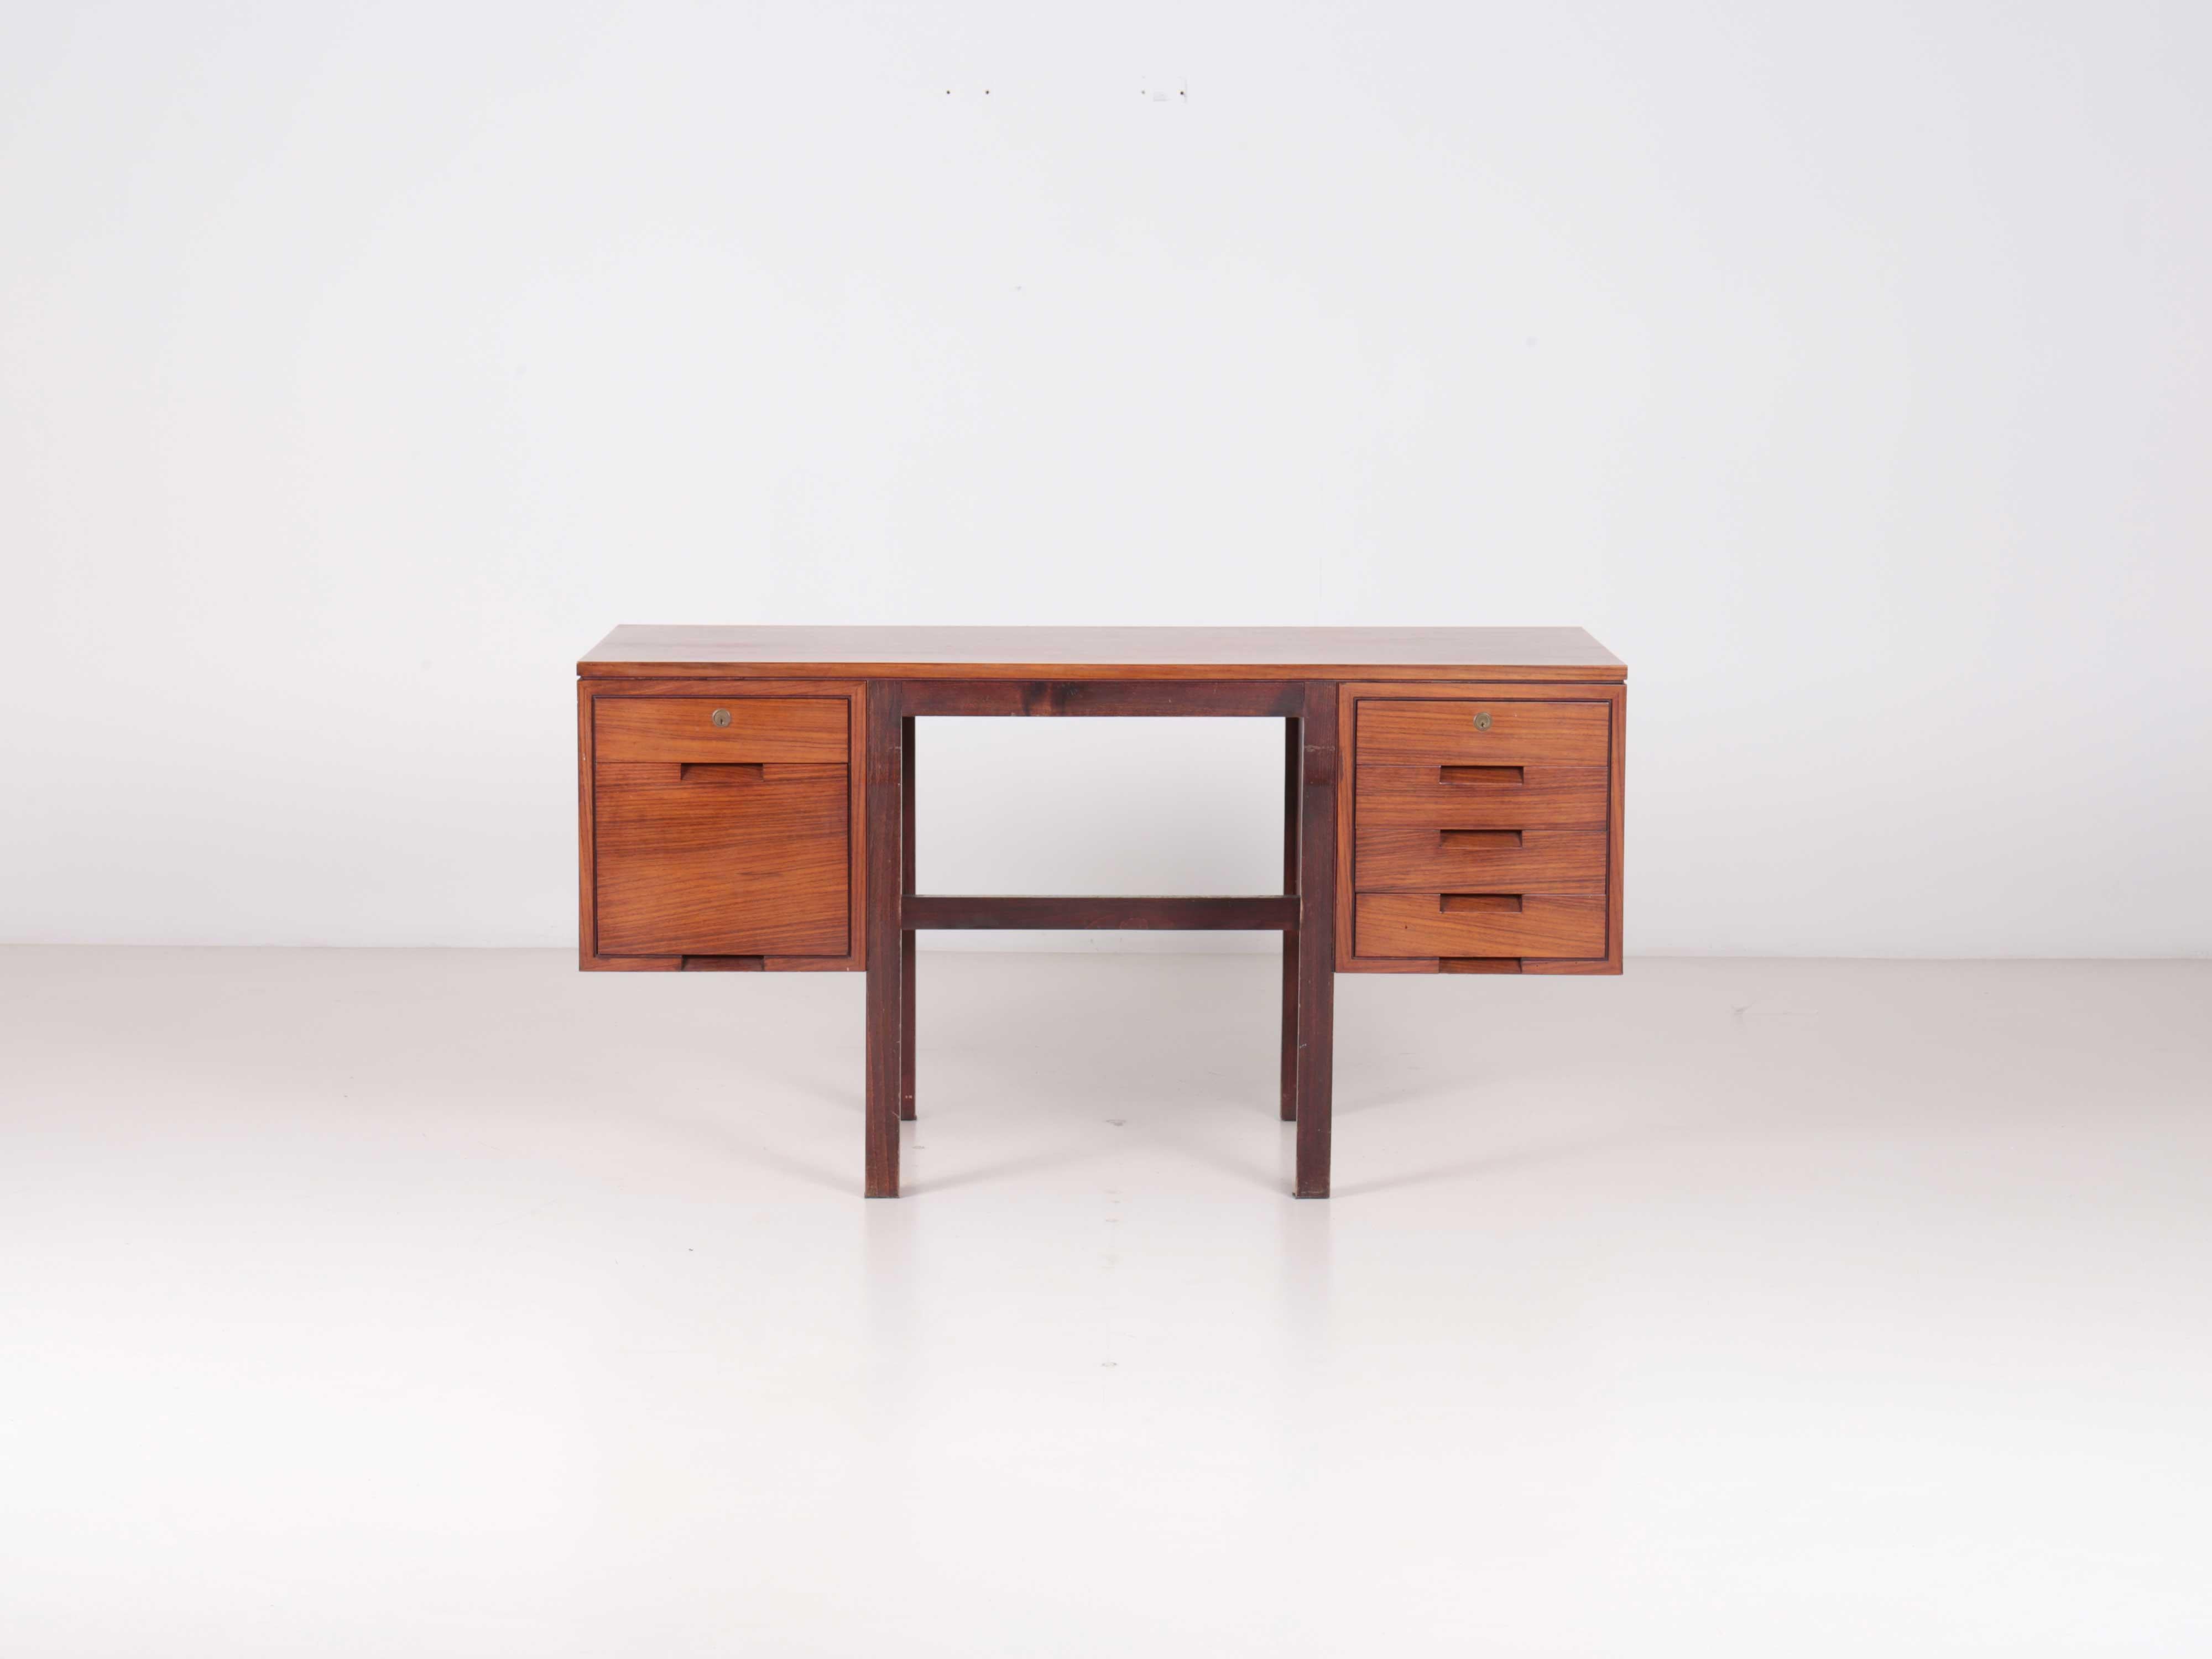 Canaan desk by Marcel Breuer, produced by Gavina spa in 1962. 

Desk with drawers and filing cabinet. Rosewood structure.

Dino Gavina was in Breuer’s country house in New Canaan. Here he found this masterpiece and decided to manufacture it with the